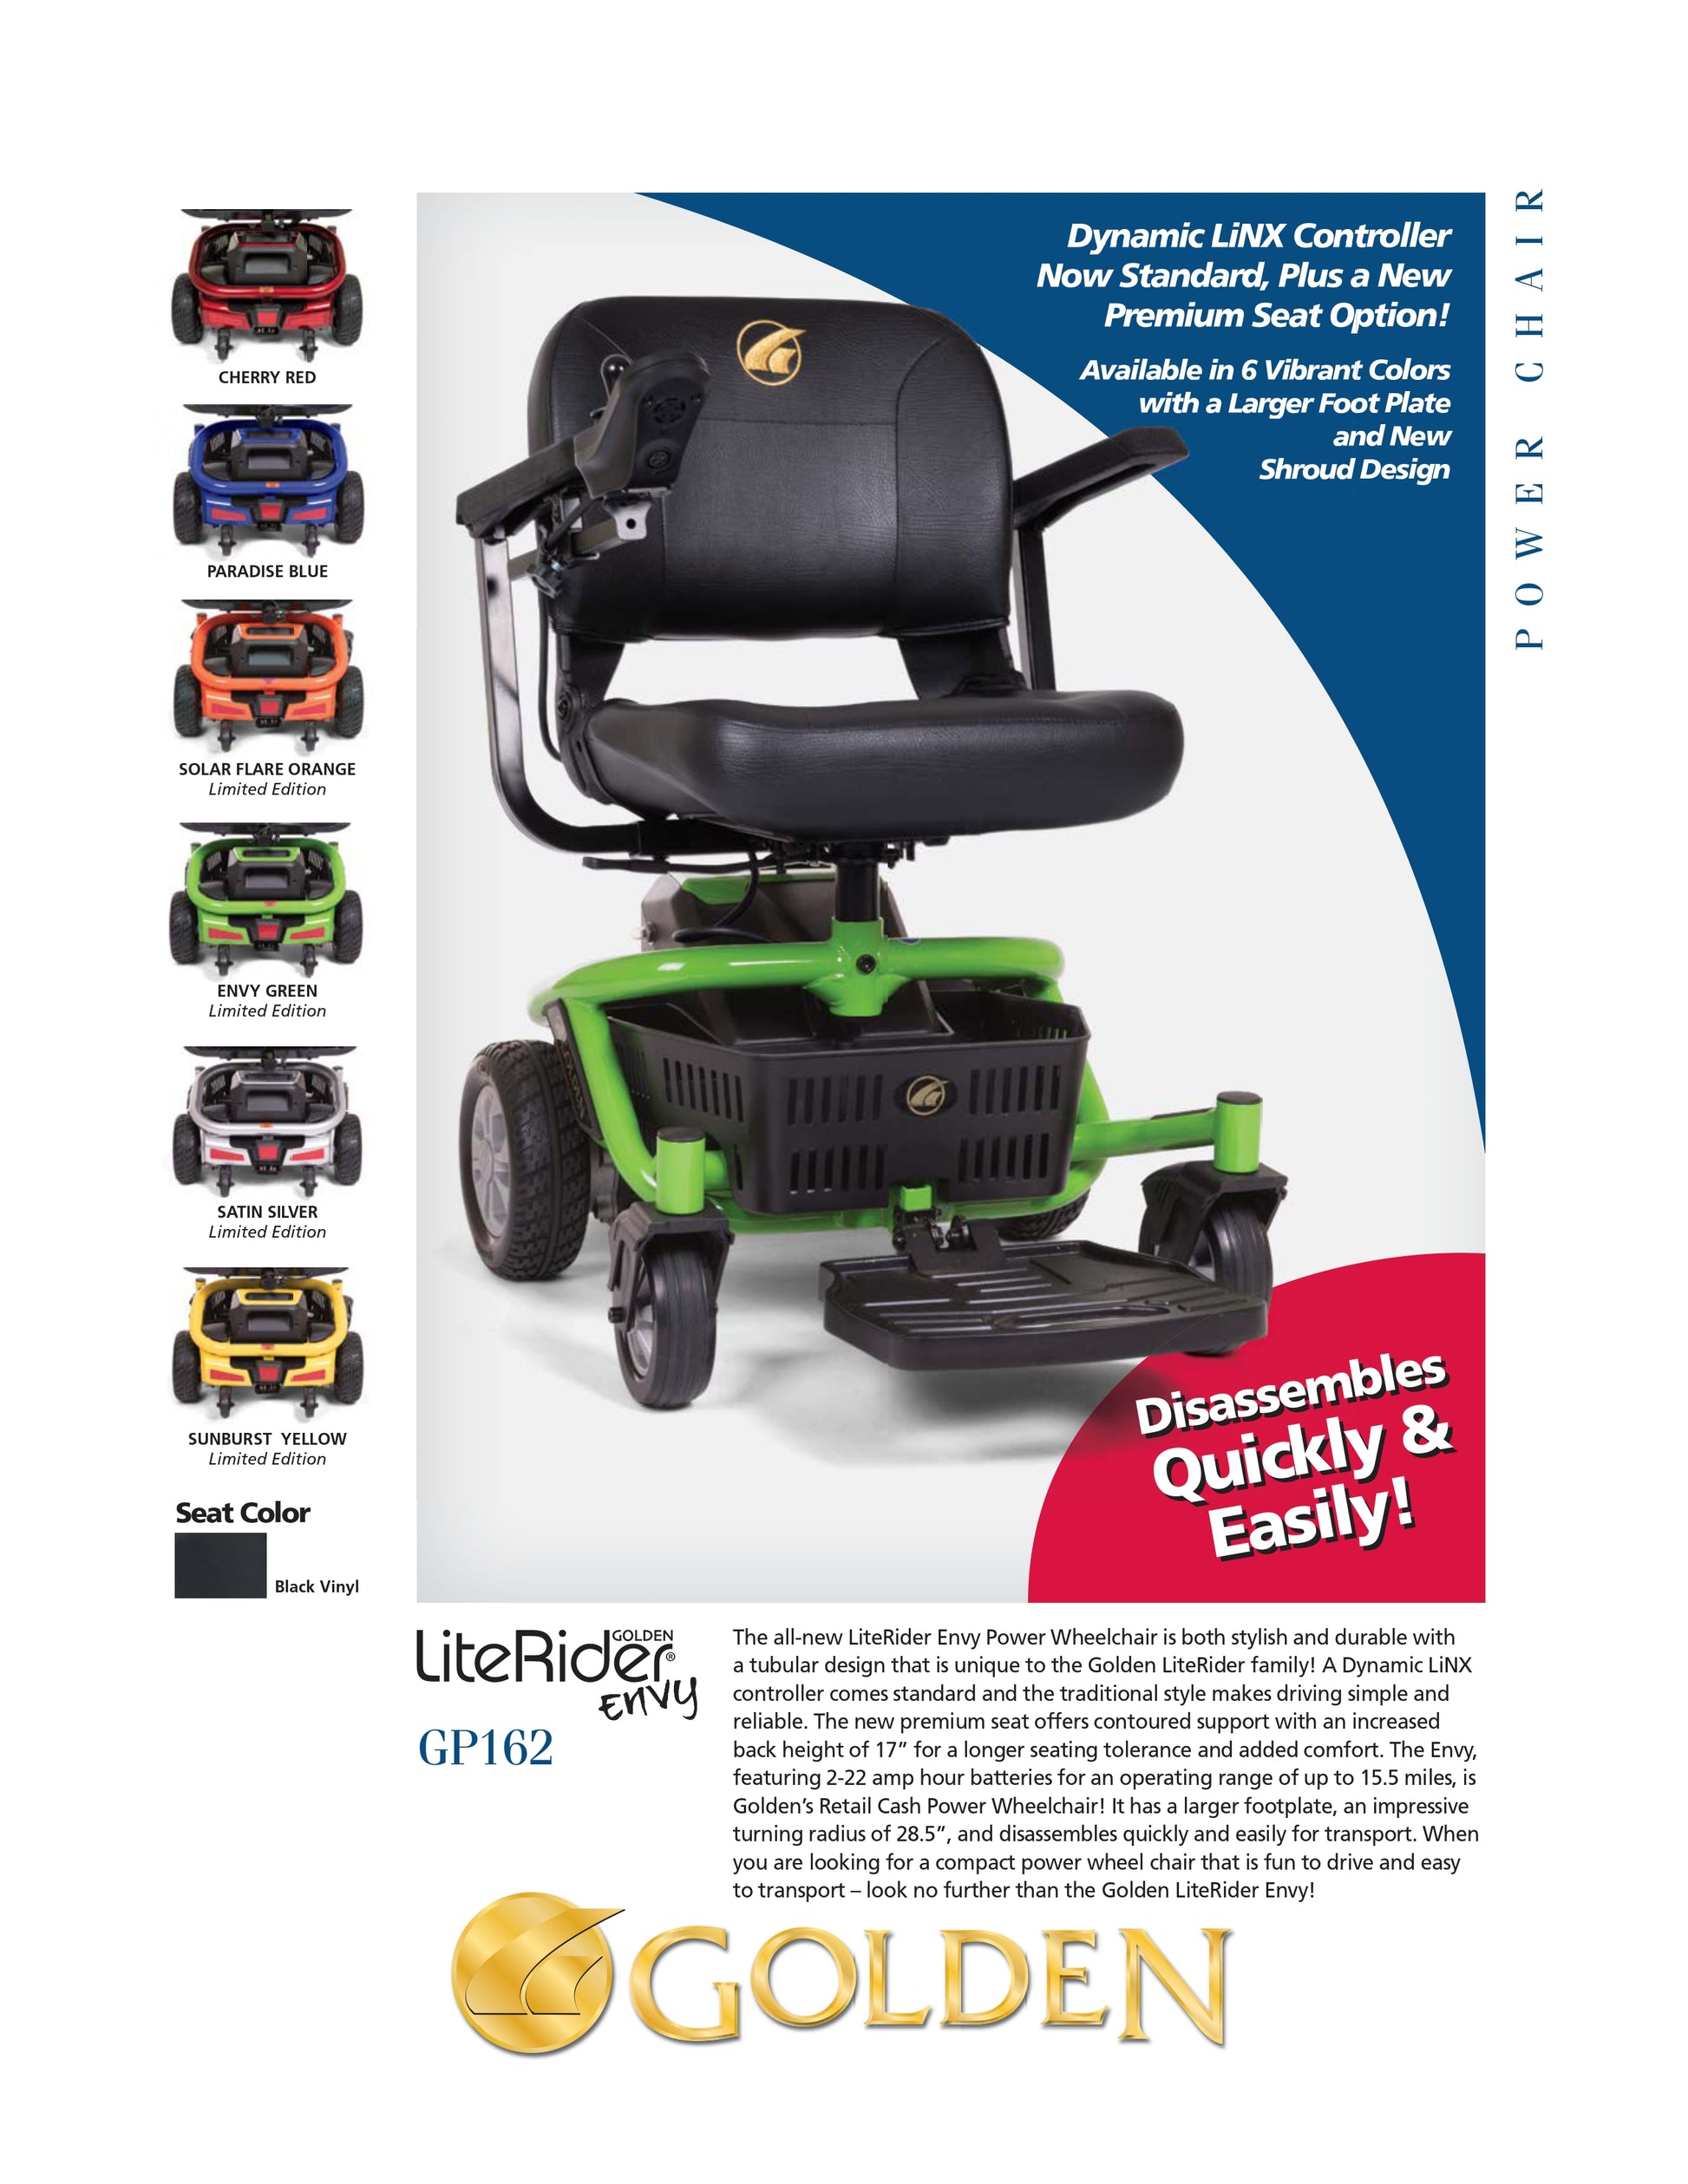 The all-new LiteRider Envy Power Wheelchair is both stylish and durable with a tubular design that is unique to the Golden LiteRider family! A Dynamic LiNX controller comes standard and the traditional style makes driving simple and reliable. 